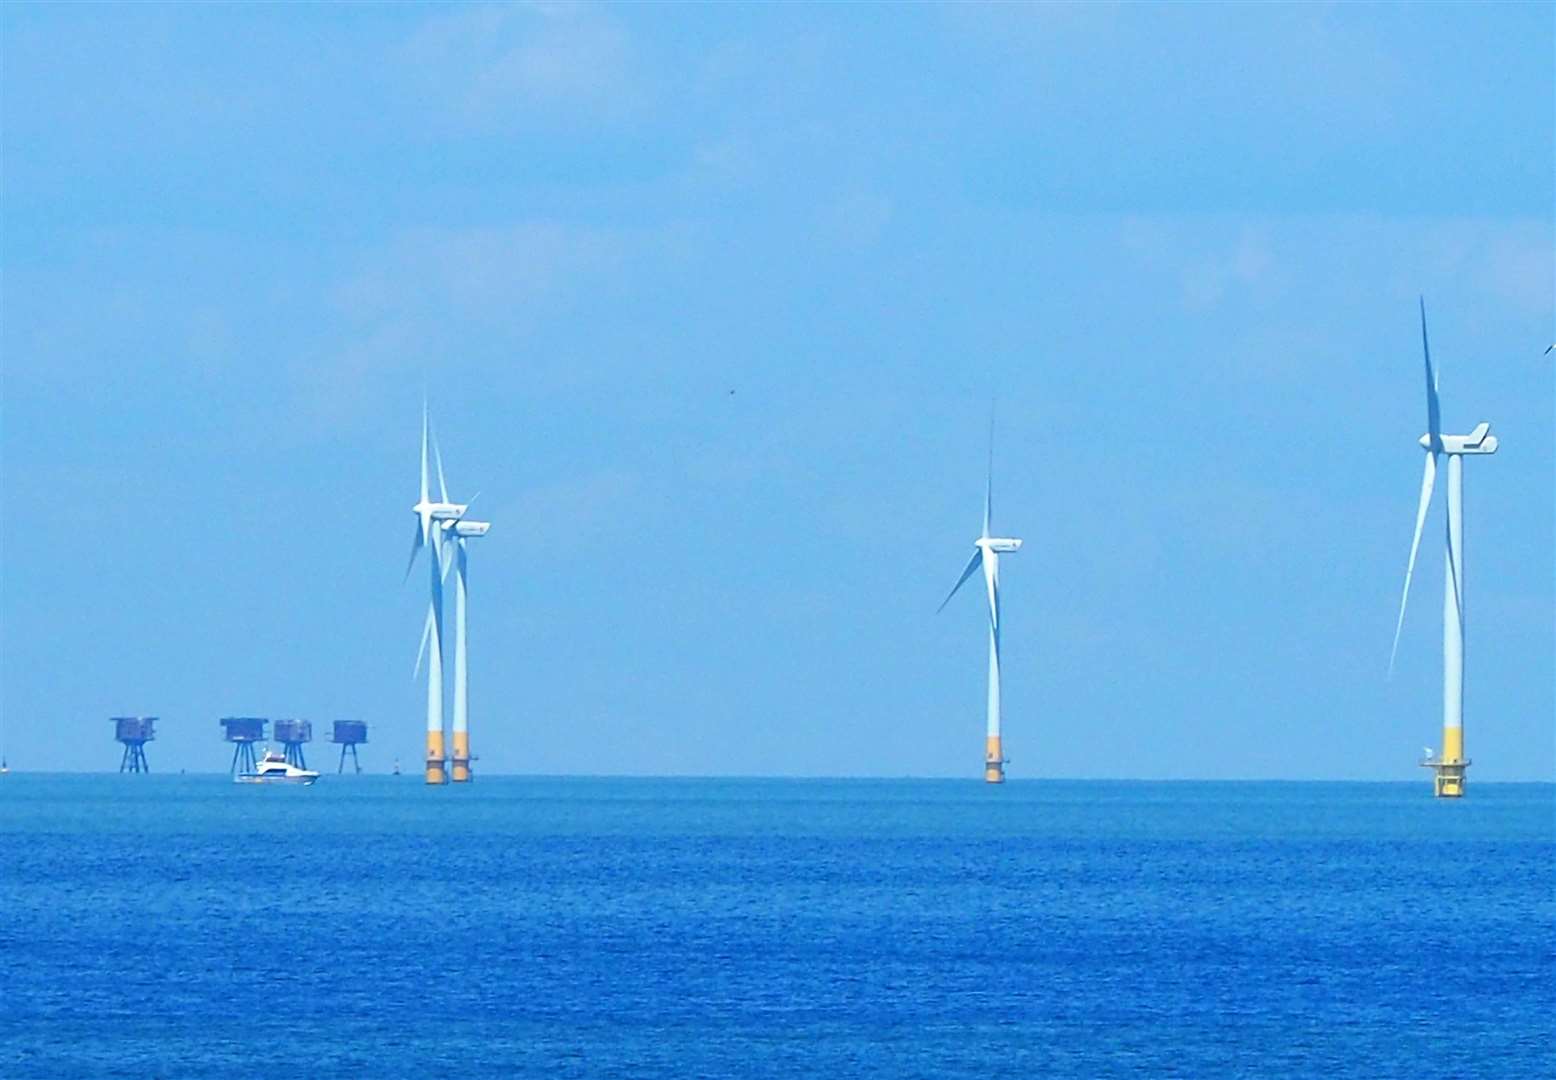 Kentish Flats offshore wind farm located offshore Herne Bay and Whitstable.Photo: Peter Gainey